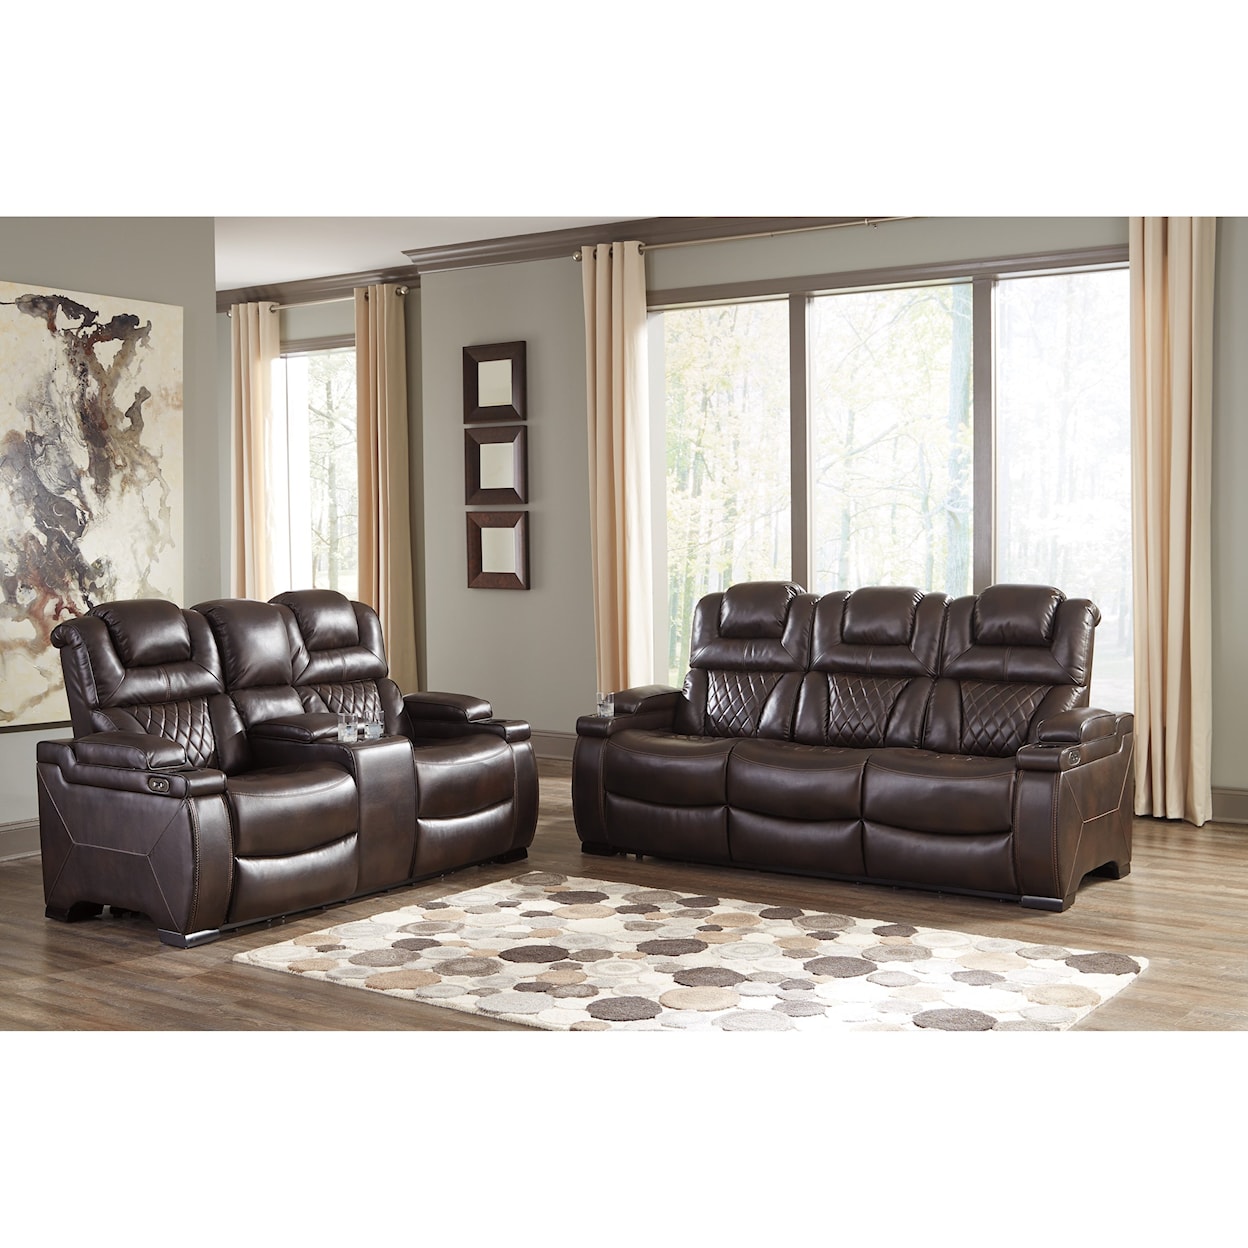 Signature Design by Ashley Furniture Warnerton Reclining Living Room Group